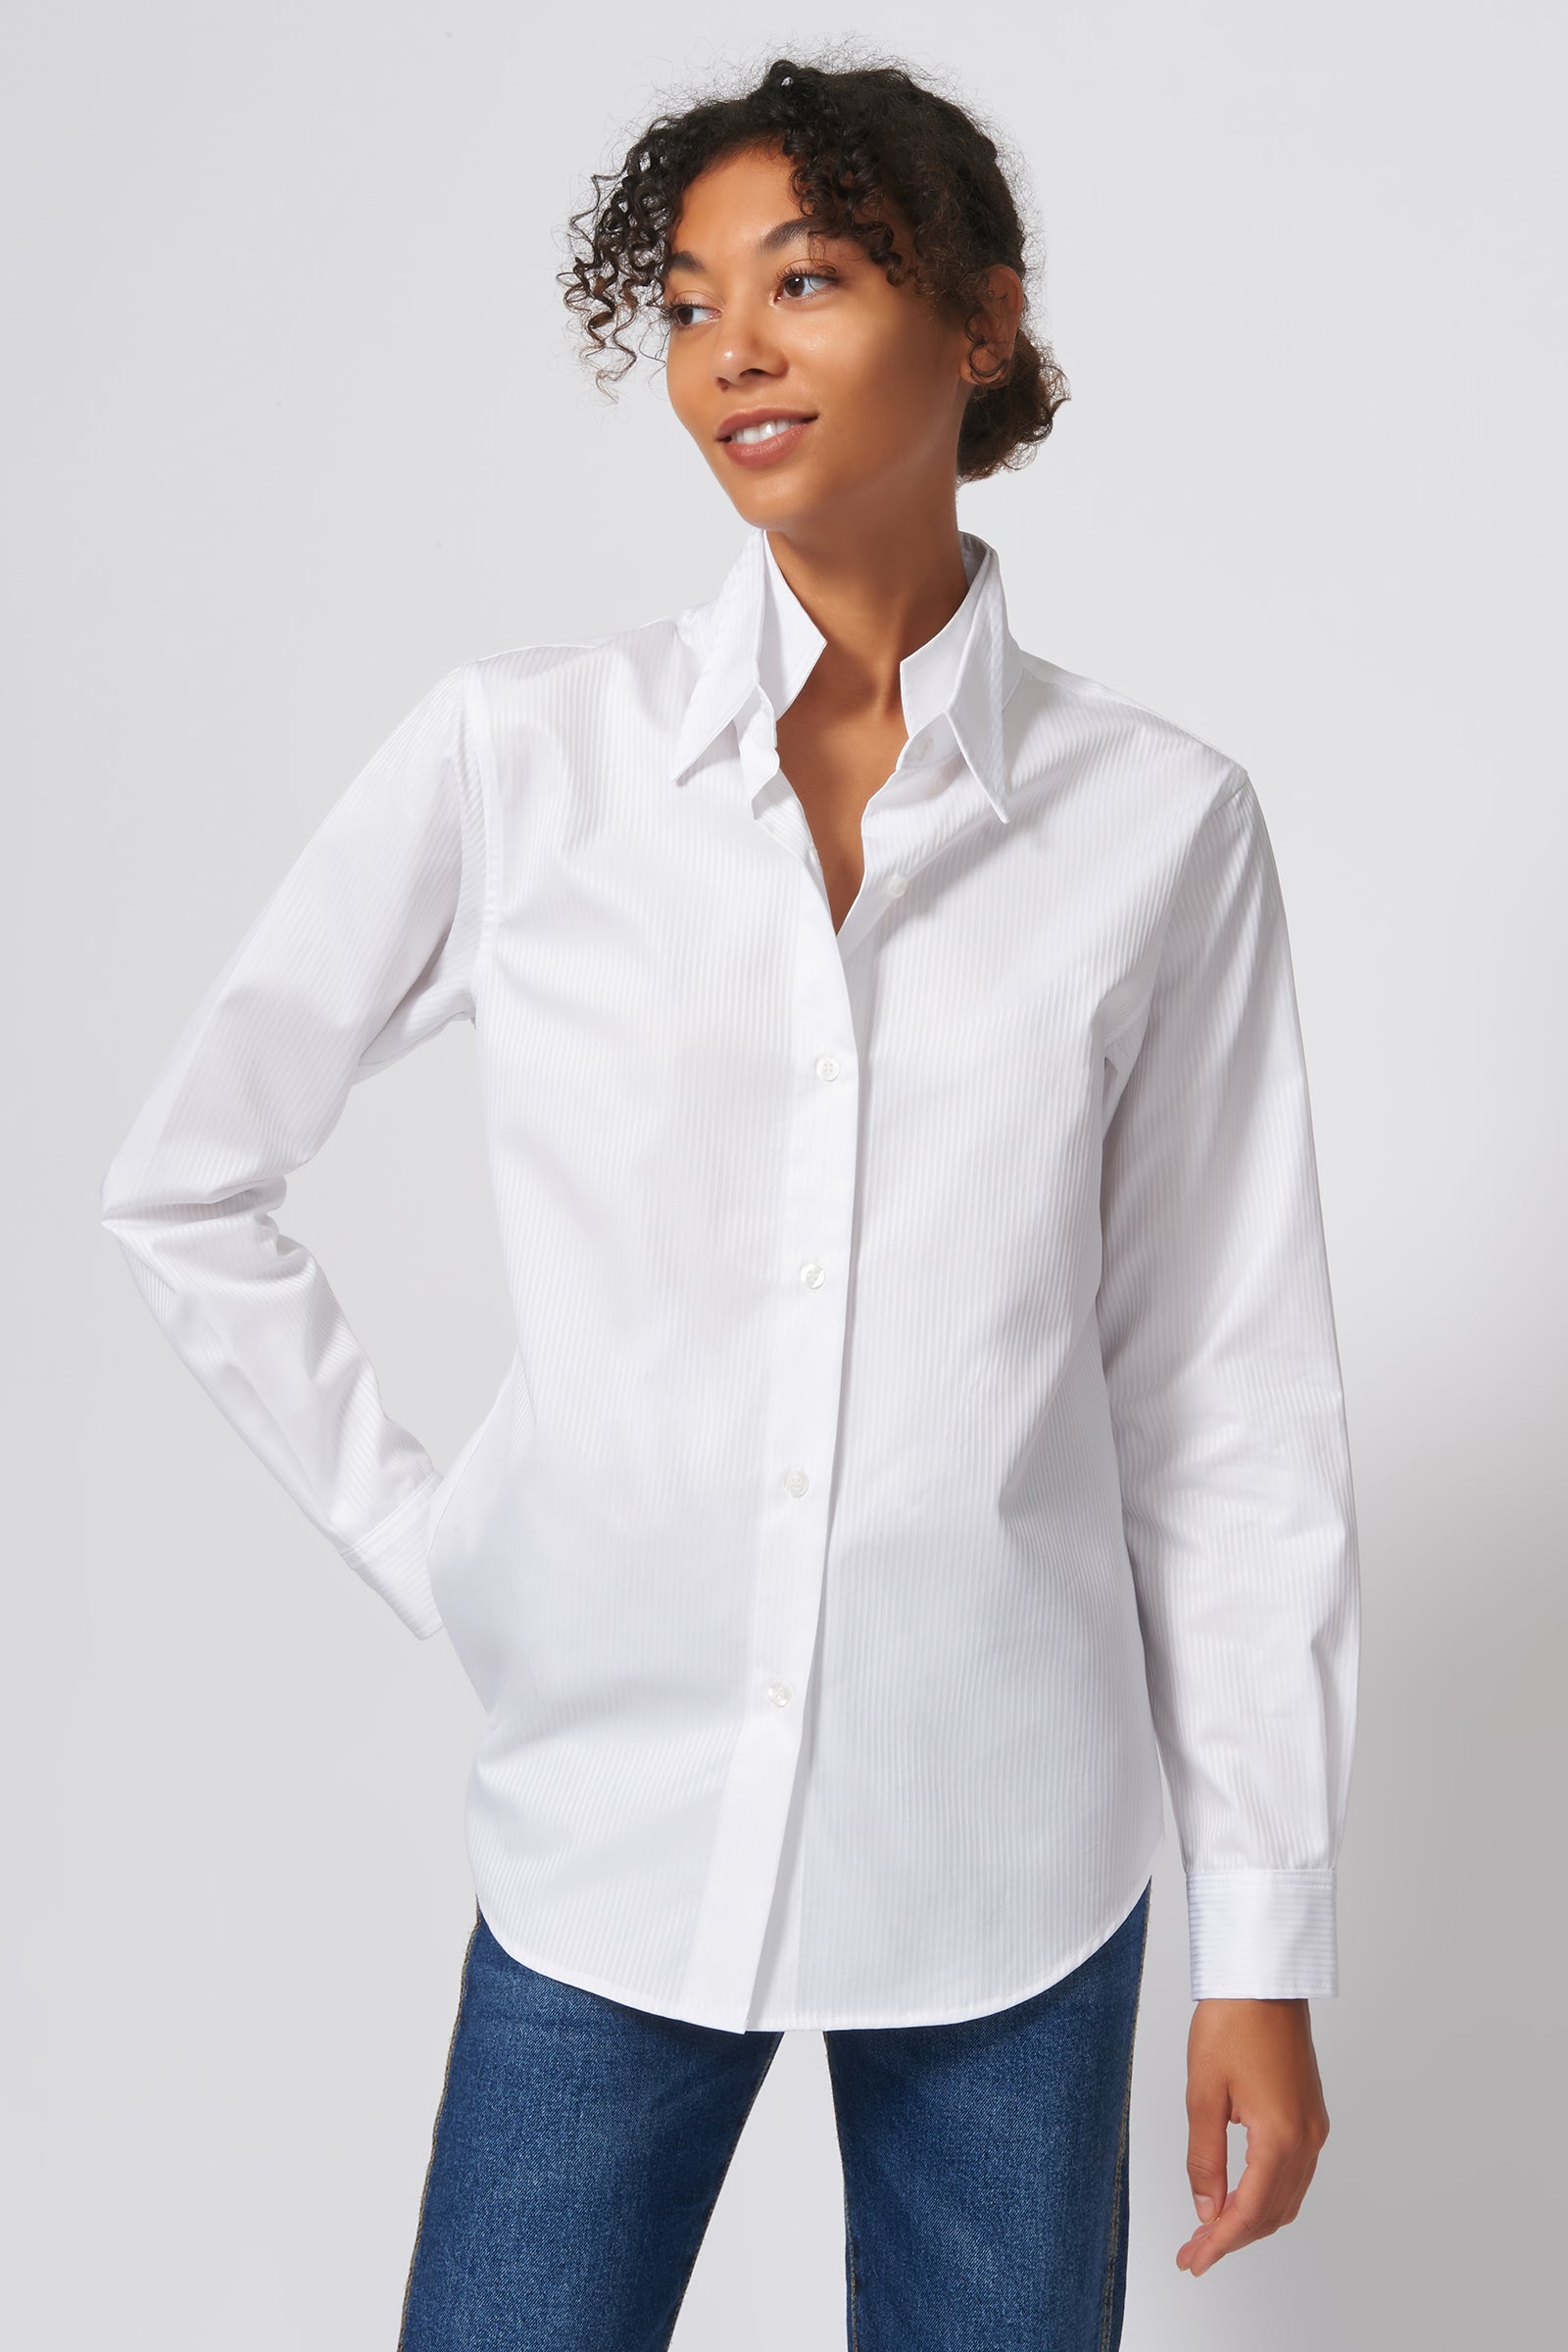 Double Collar Shirt in White Satin Stripe Made From 100% Cotton